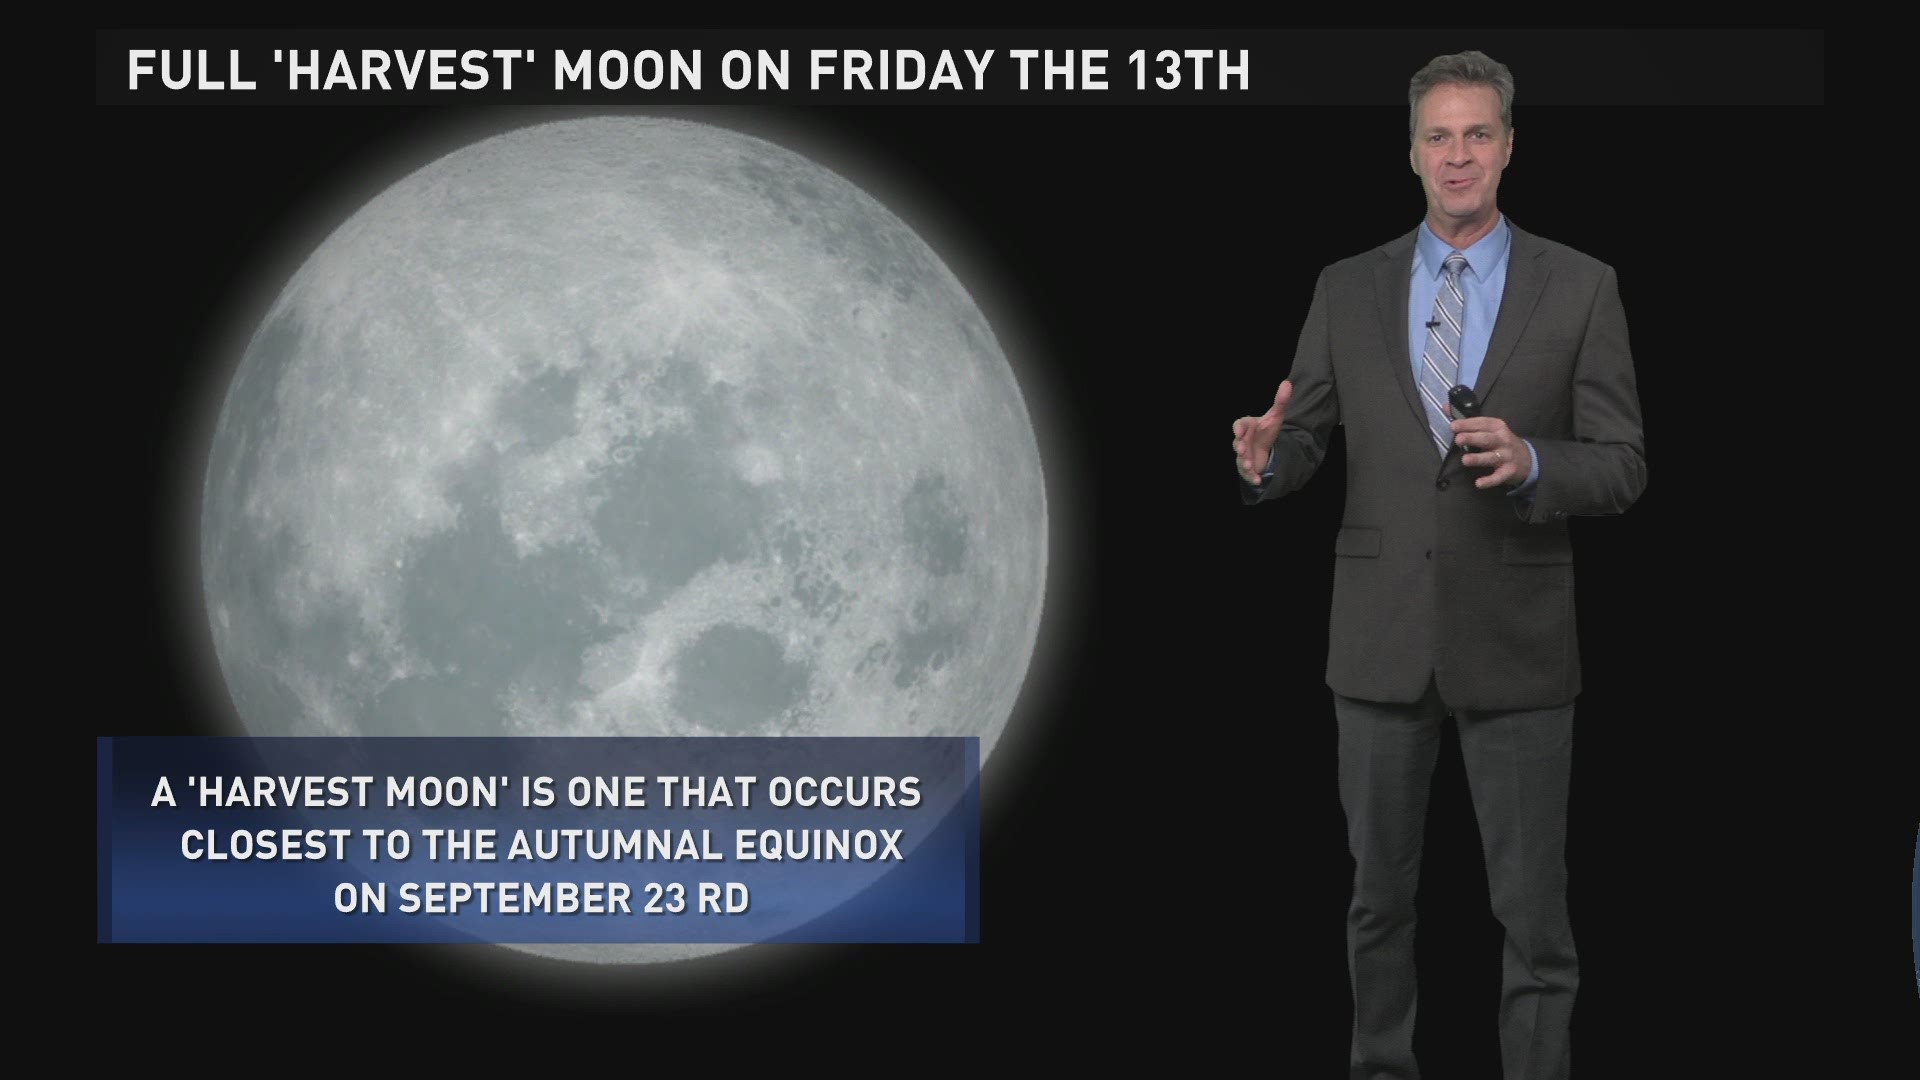 It's also a full 'harvest' and full 'micro' moon... all on freaky Friday the 13th!